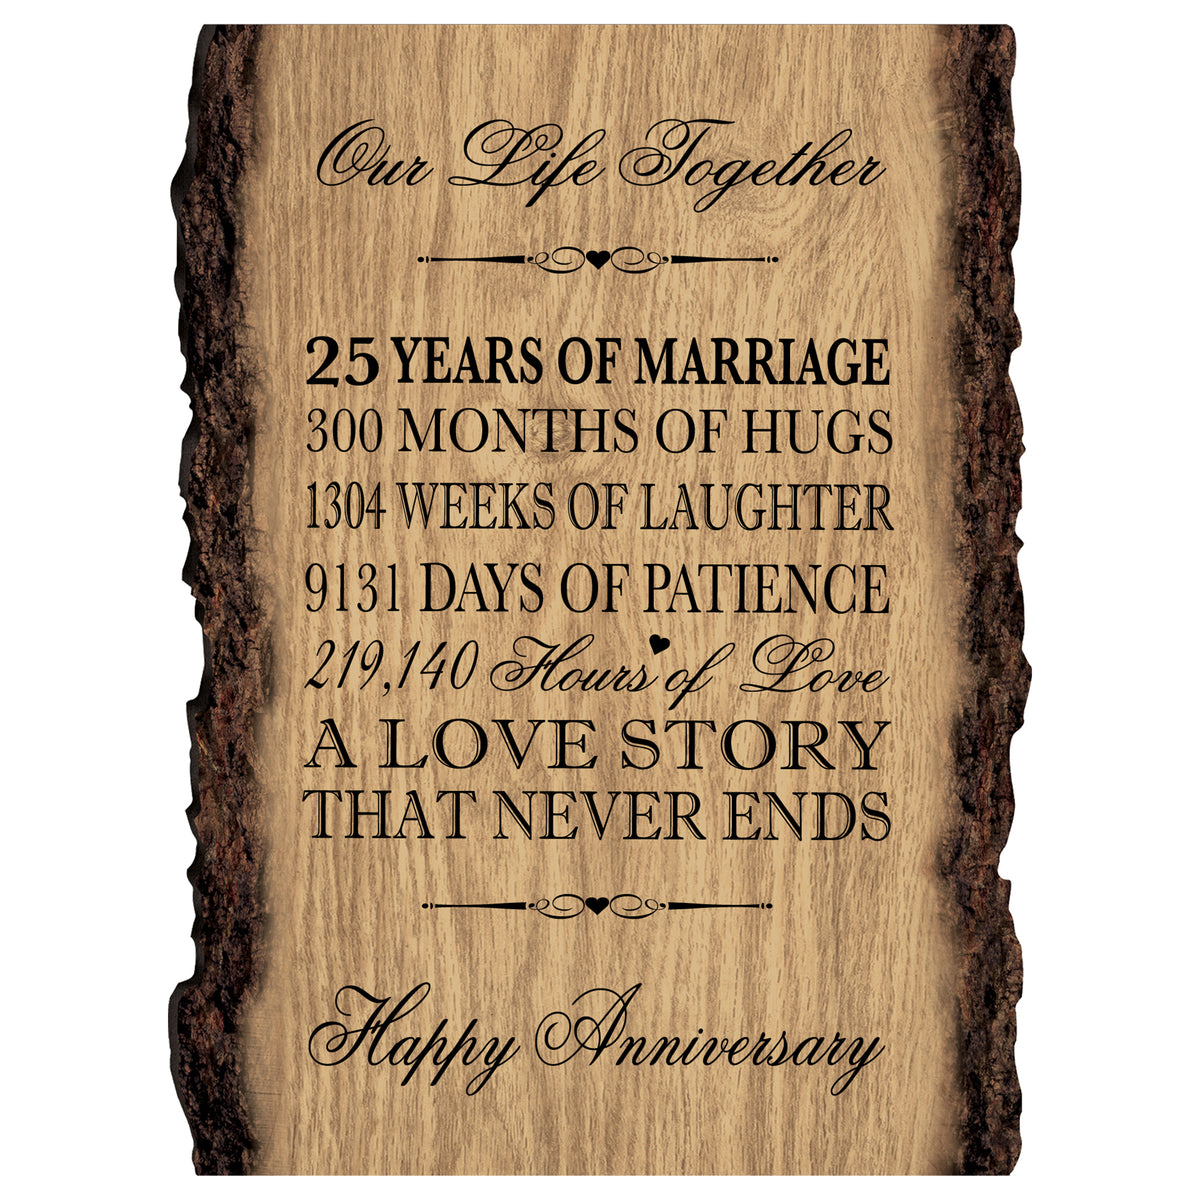 Rustic Wedding Anniversary 9x12 Barky Wall Plaque Gift For Parents, Grandparents New Couple - 25 Years Of Marriage